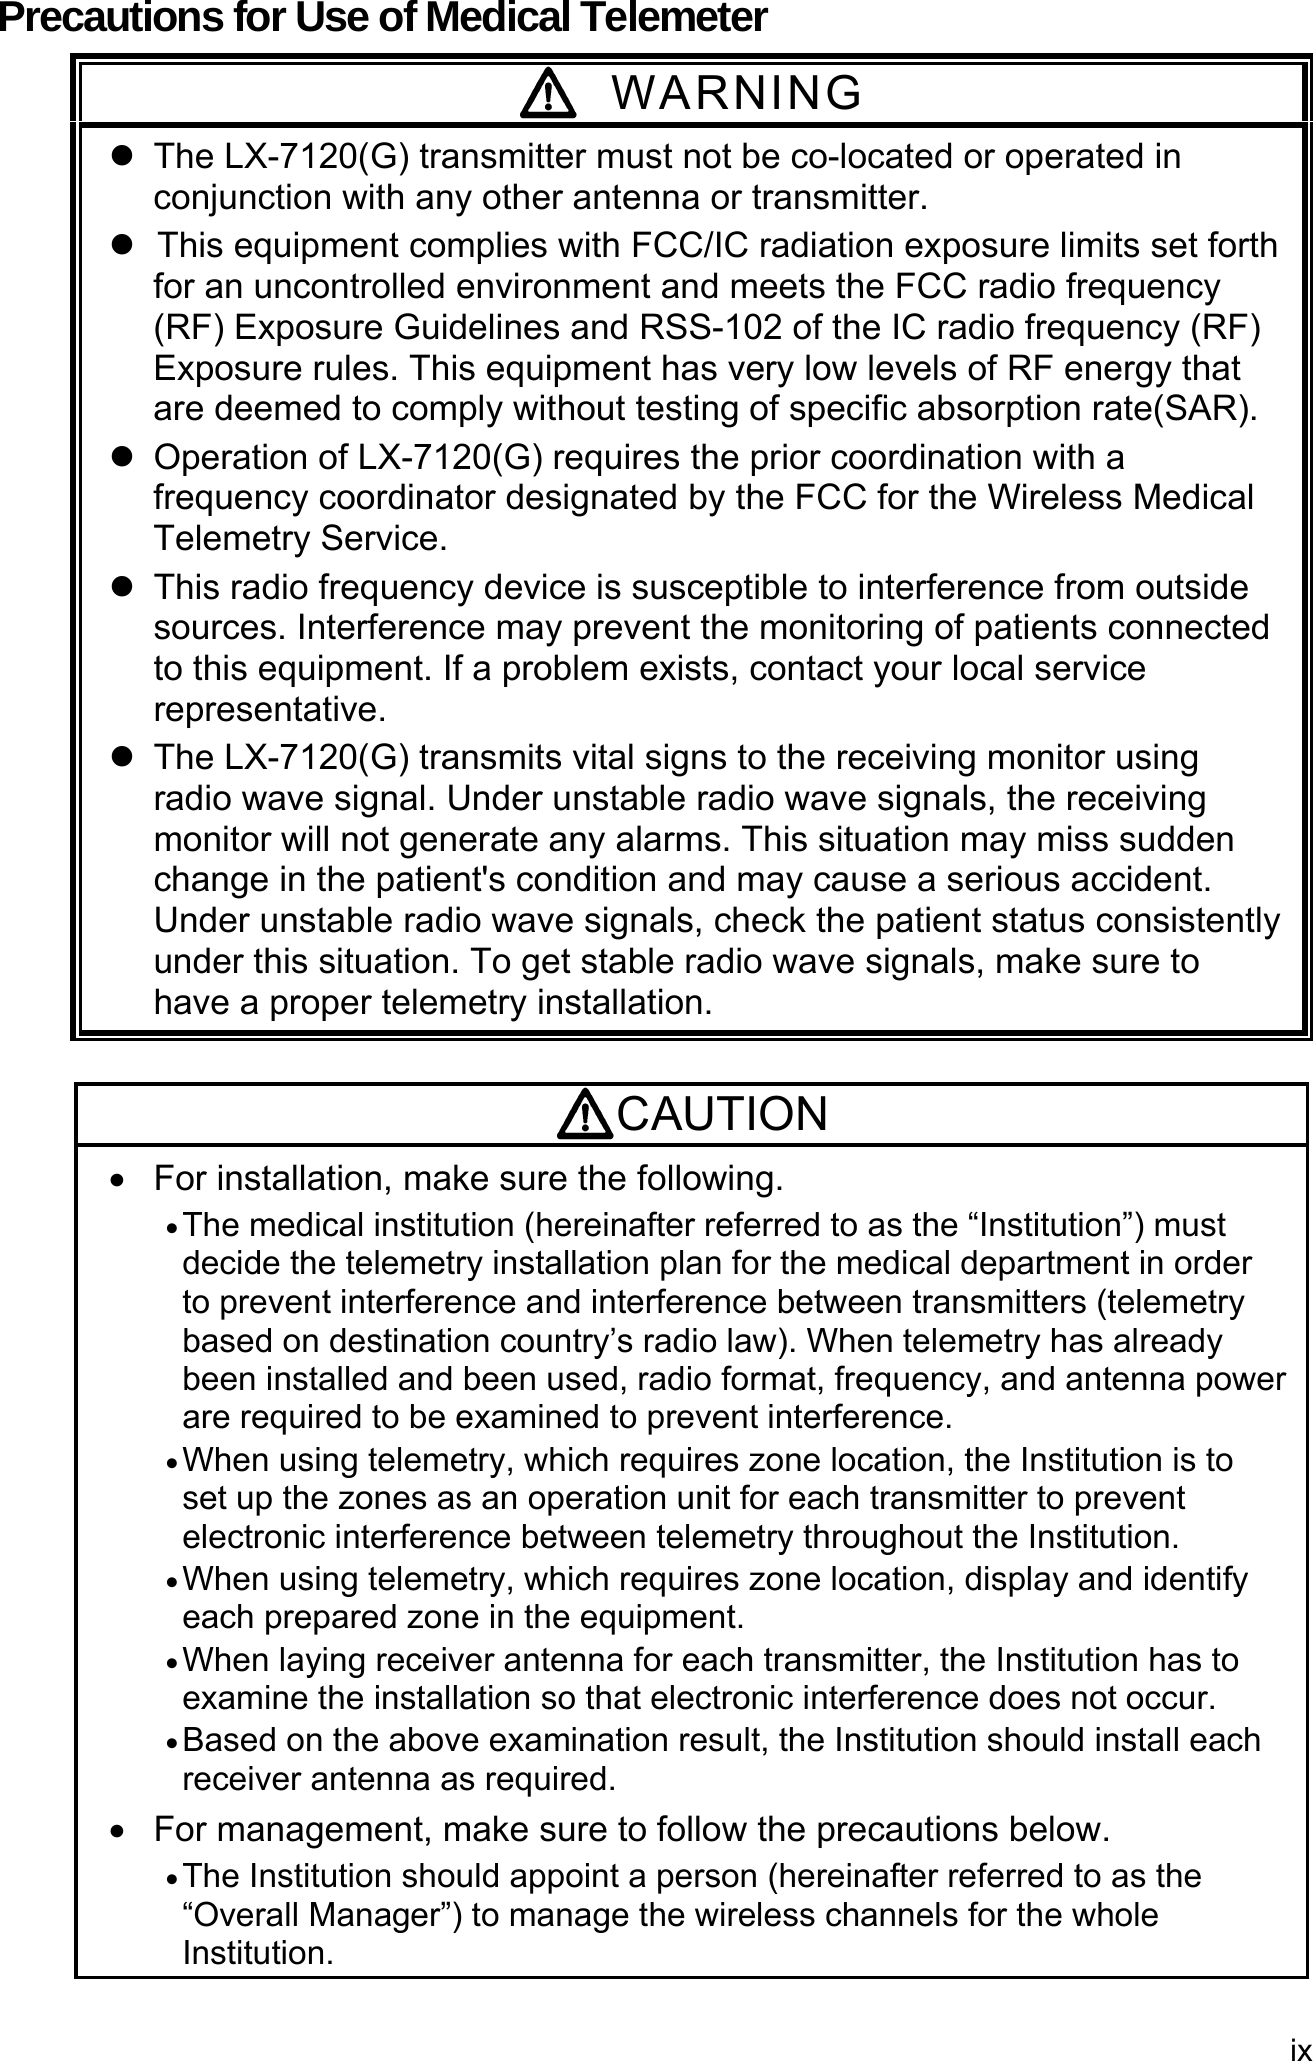 ix  Precautions for Use of Medical Telemeter  WARNING   The LX-7120(G) transmitter must not be co-located or operated in conjunction with any other antenna or transmitter.  This equipment complies with FCC/IC radiation exposure limits set forth for an uncontrolled environment and meets the FCC radio frequency (RF) Exposure Guidelines and RSS-102 of the IC radio frequency (RF) Exposure rules. This equipment has very low levels of RF energy that are deemed to comply without testing of specific absorption rate(SAR).   Operation of LX-7120(G) requires the prior coordination with a frequency coordinator designated by the FCC for the Wireless Medical Telemetry Service.     This radio frequency device is susceptible to interference from outside sources. Interference may prevent the monitoring of patients connected to this equipment. If a problem exists, contact your local service representative.   The LX-7120(G) transmits vital signs to the receiving monitor using radio wave signal. Under unstable radio wave signals, the receiving monitor will not generate any alarms. This situation may miss sudden change in the patient&apos;s condition and may cause a serious accident. Under unstable radio wave signals, check the patient status consistently under this situation. To get stable radio wave signals, make sure to have a proper telemetry installation.  CAUTION   For installation, make sure the following.  The medical institution (hereinafter referred to as the “Institution”) must decide the telemetry installation plan for the medical department in order to prevent interference and interference between transmitters (telemetry based on destination country’s radio law). When telemetry has already been installed and been used, radio format, frequency, and antenna power are required to be examined to prevent interference.  When using telemetry, which requires zone location, the Institution is to set up the zones as an operation unit for each transmitter to prevent electronic interference between telemetry throughout the Institution.  When using telemetry, which requires zone location, display and identify each prepared zone in the equipment.  When laying receiver antenna for each transmitter, the Institution has to examine the installation so that electronic interference does not occur.  Based on the above examination result, the Institution should install each receiver antenna as required.   For management, make sure to follow the precautions below.  The Institution should appoint a person (hereinafter referred to as the “Overall Manager”) to manage the wireless channels for the whole Institution.  